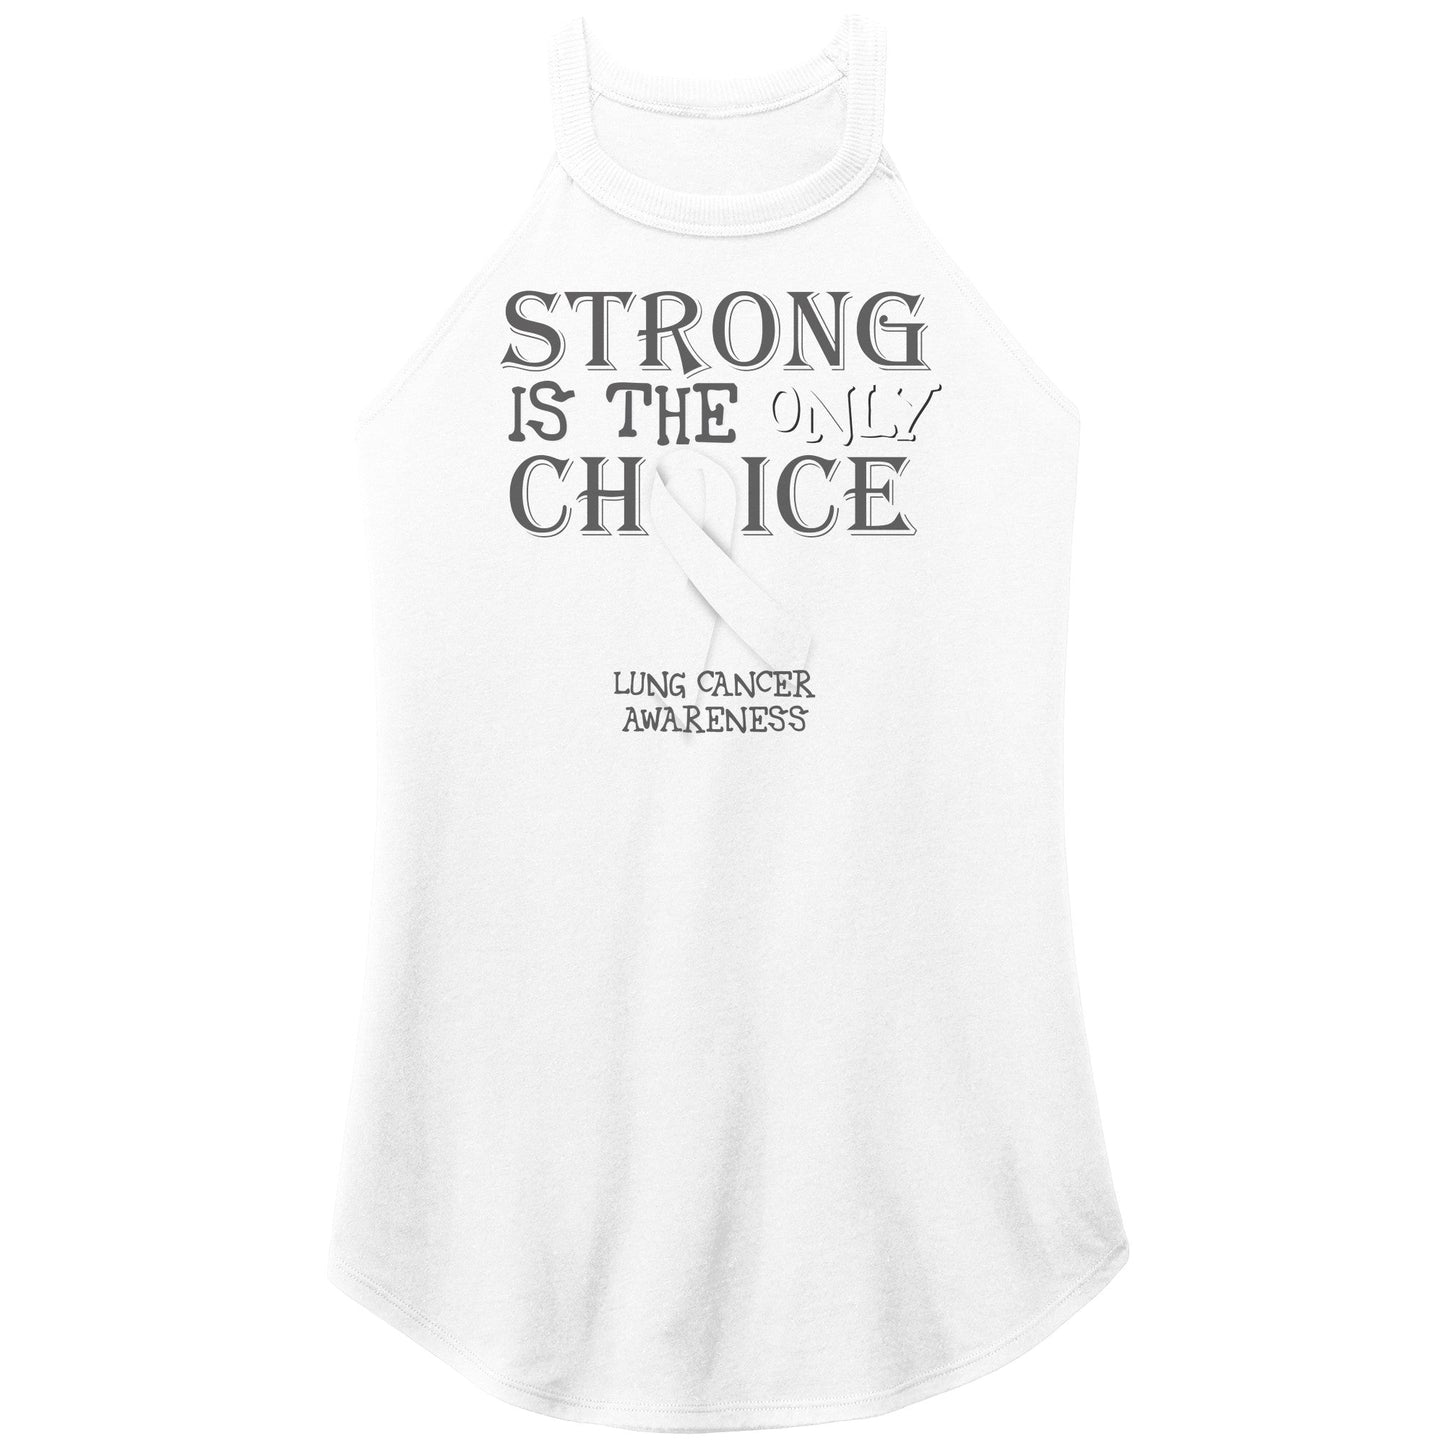 Strong is the Only Choice -Lung Cancer T-Shirt, Hoodie, Tank |x|